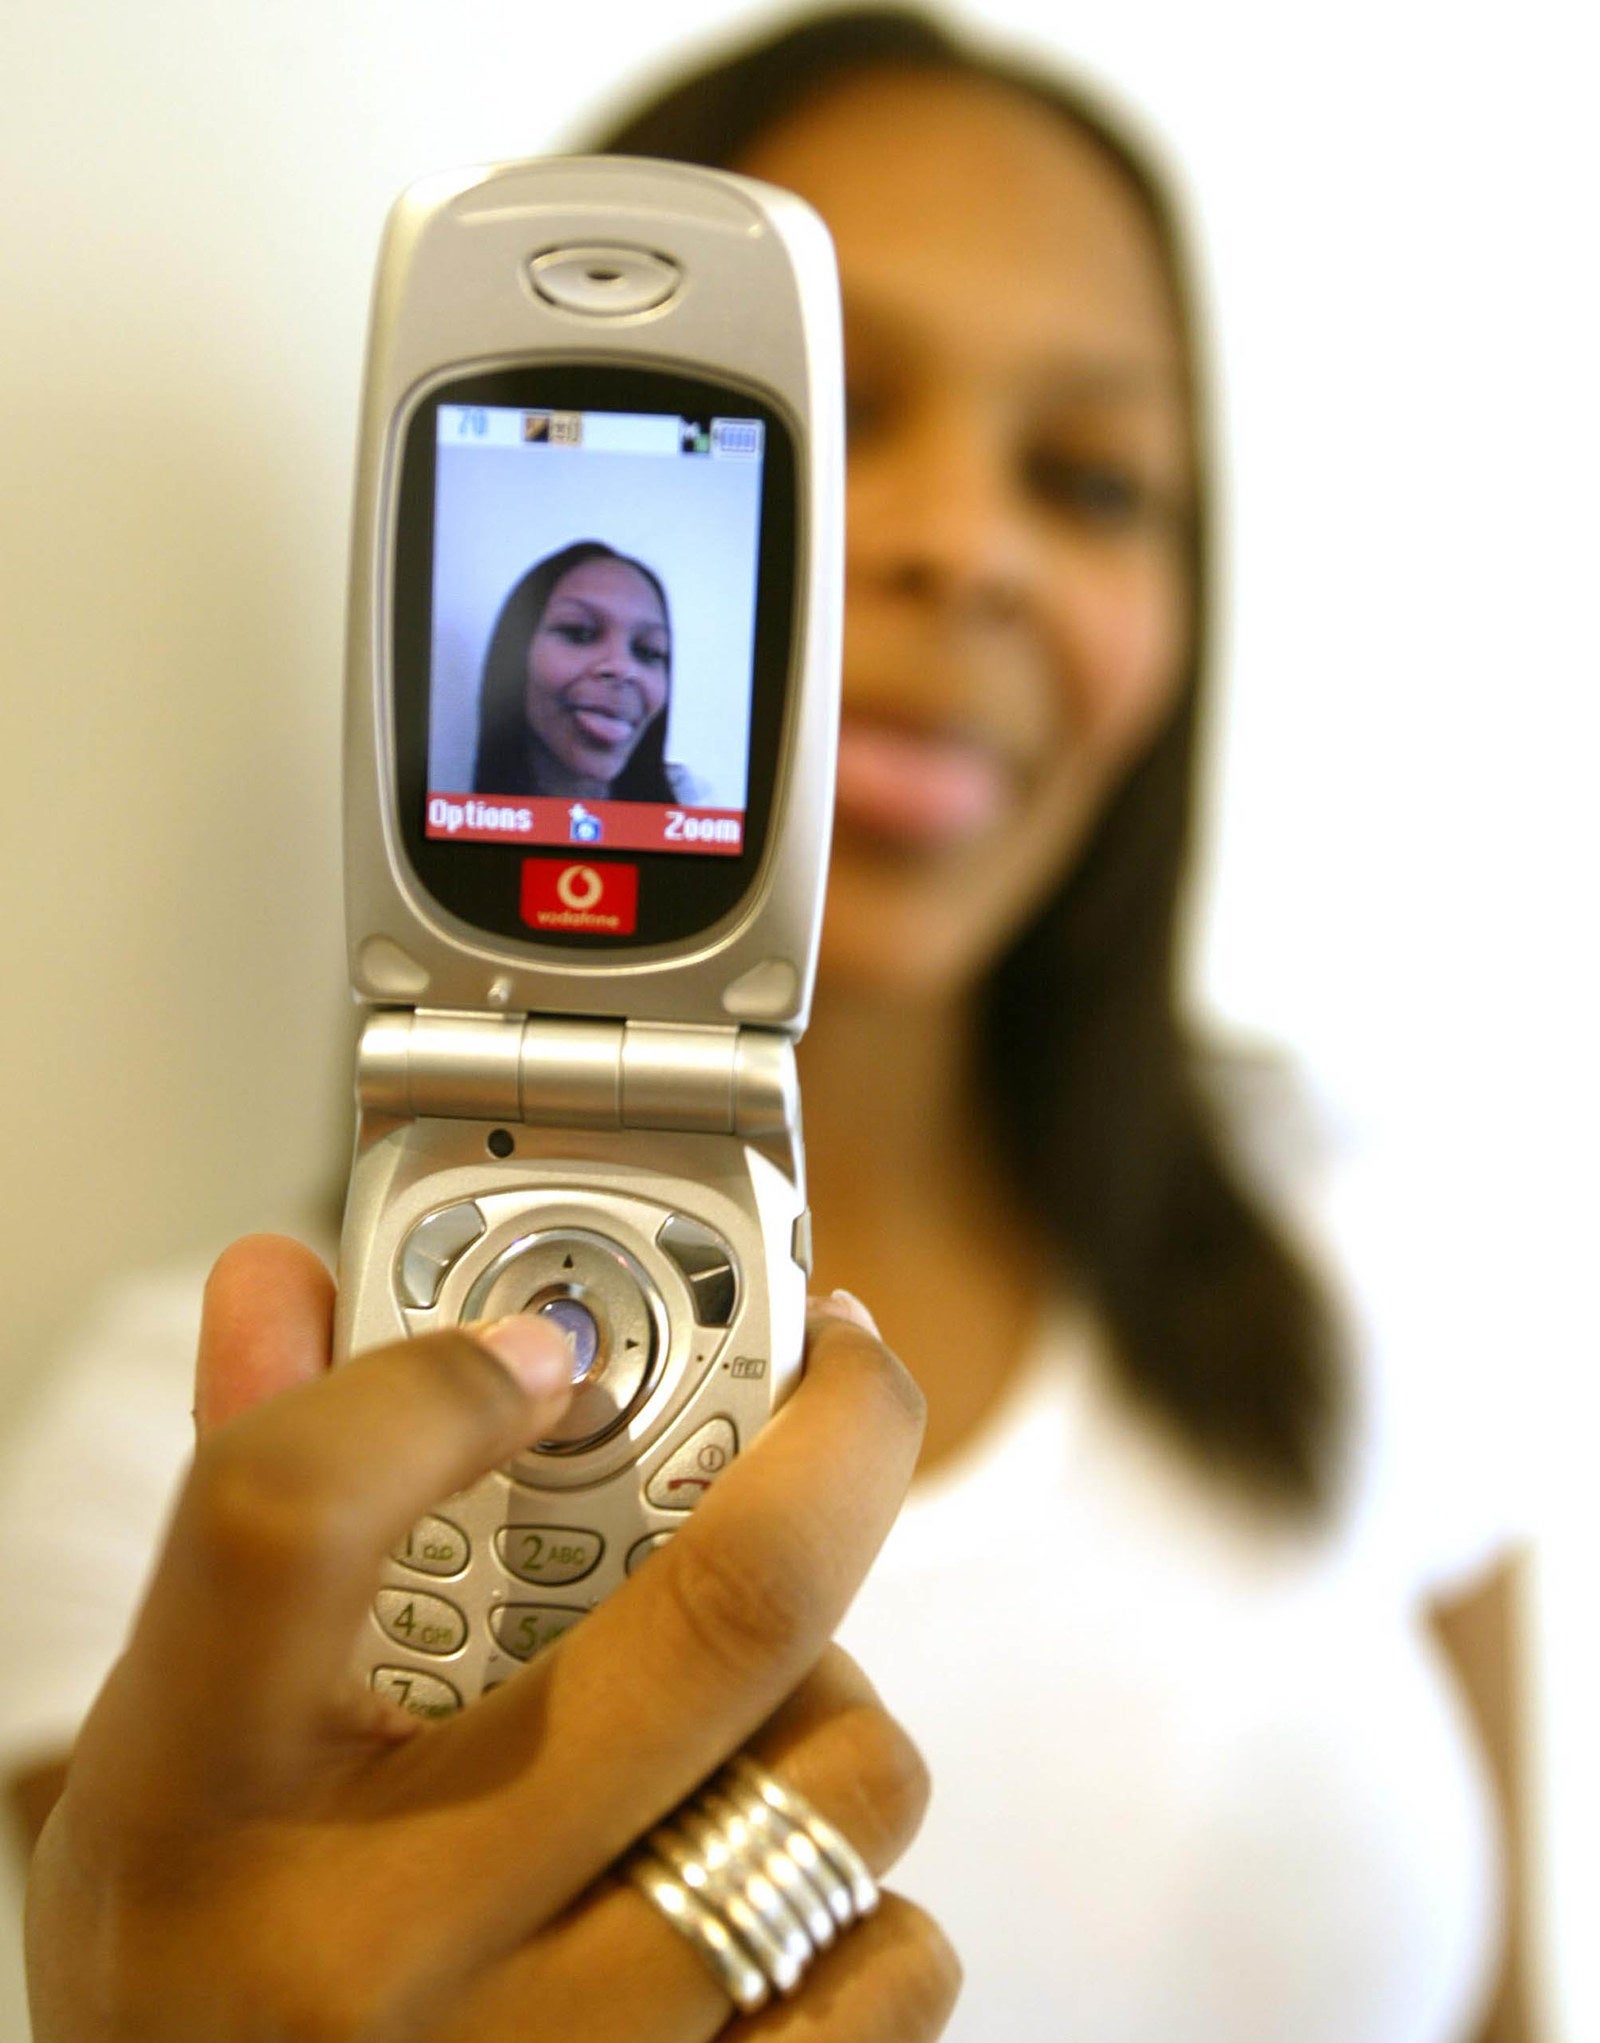 A Samantha holding the flip phone screen towards the camera and her face (her sticking out her tongue) is in the center of the screen.